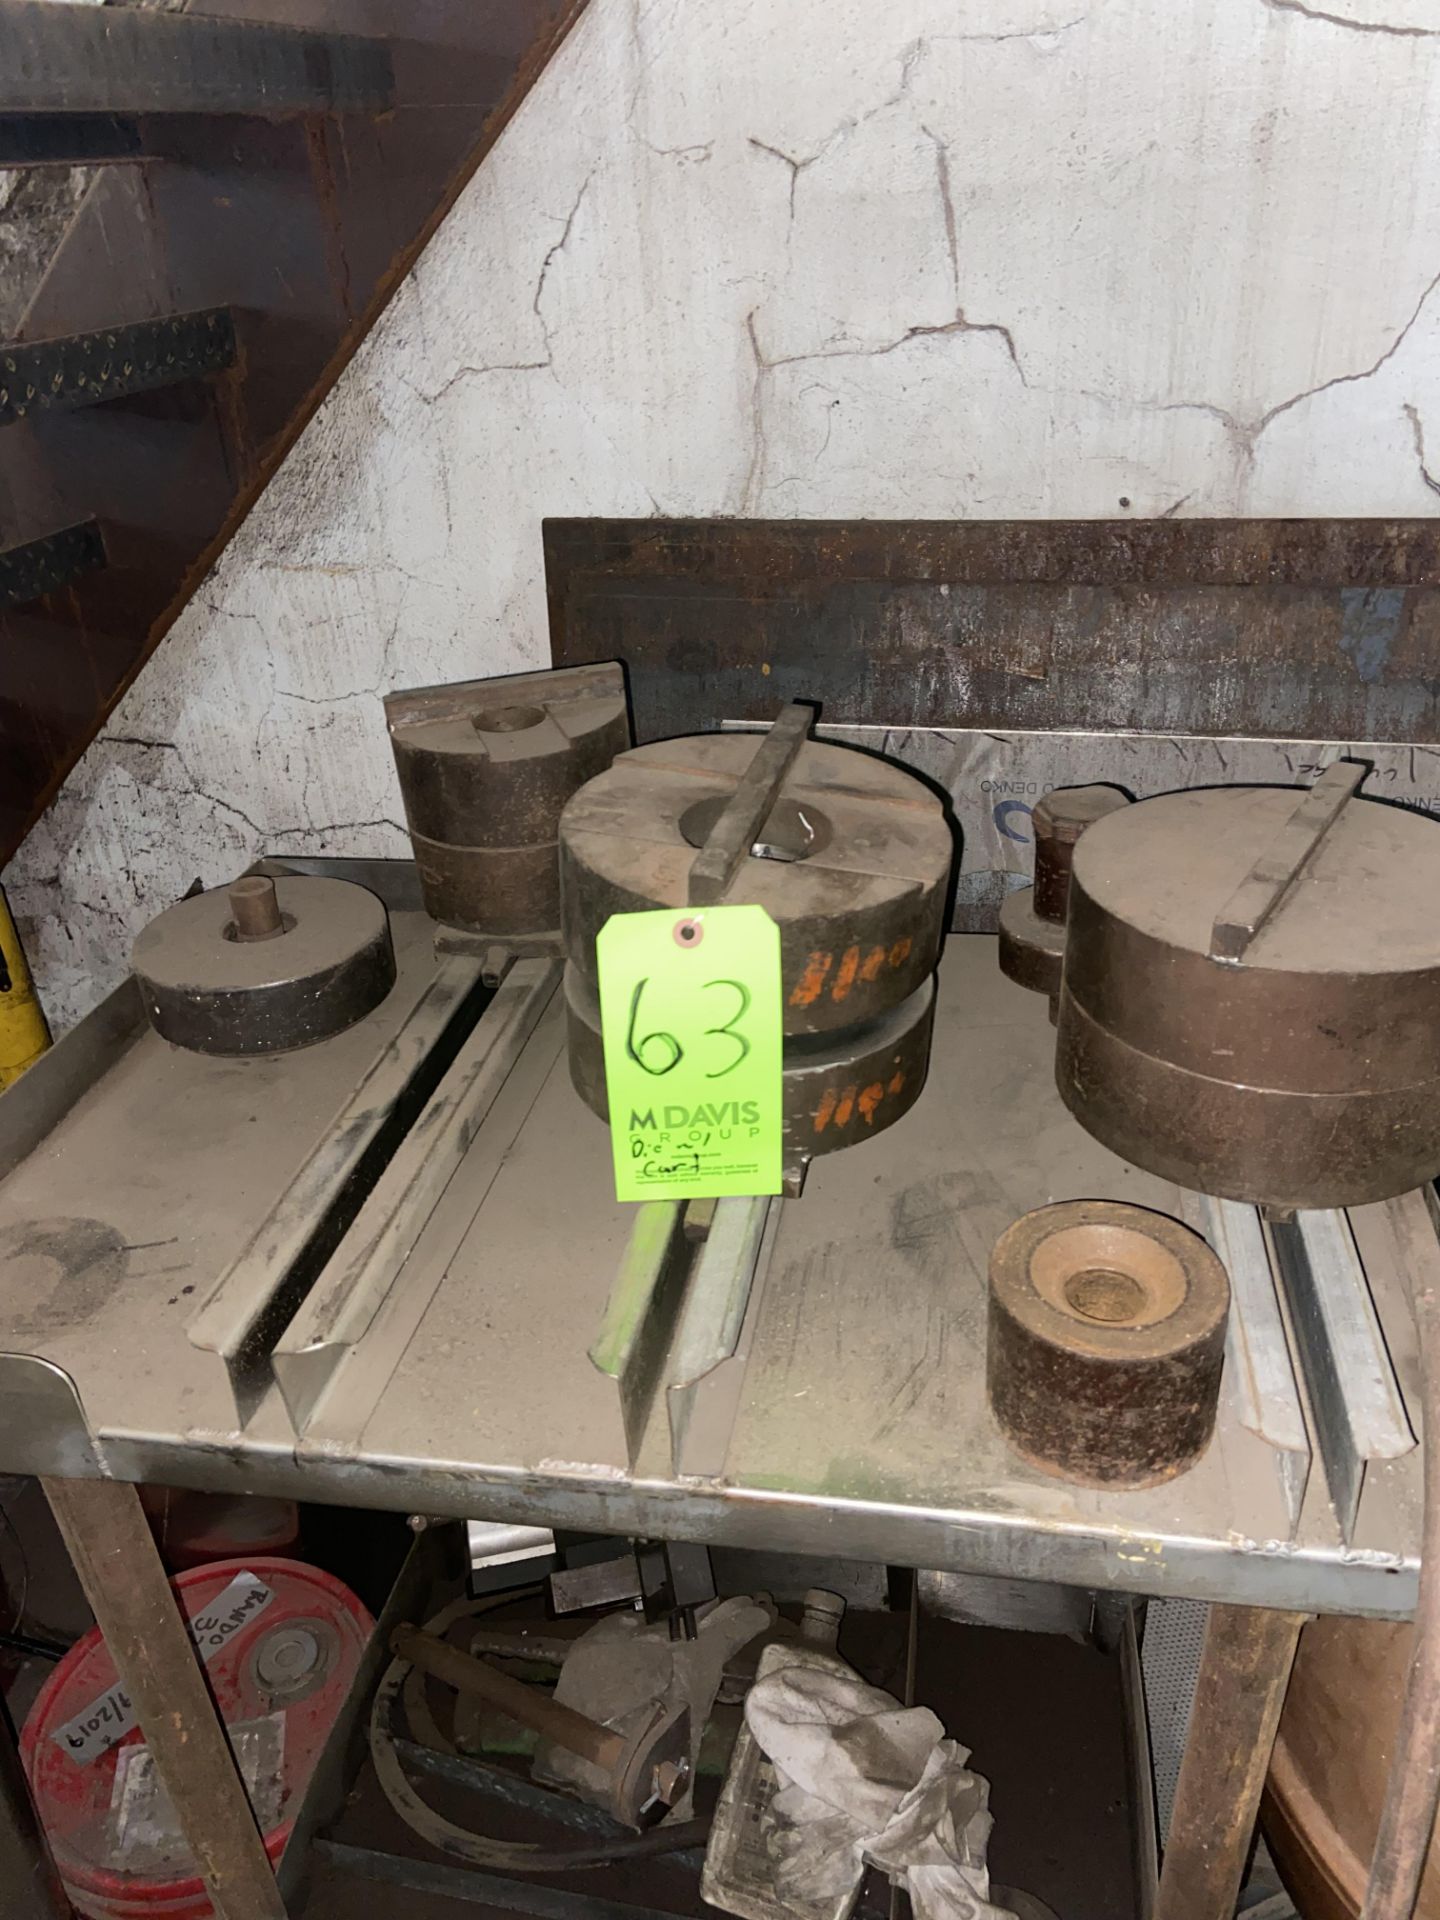 Lot of Assorted Die & Tooling for Brake, Includes Portable Cart (LOCATED IN PITTSBURGH, PA) - Image 4 of 4